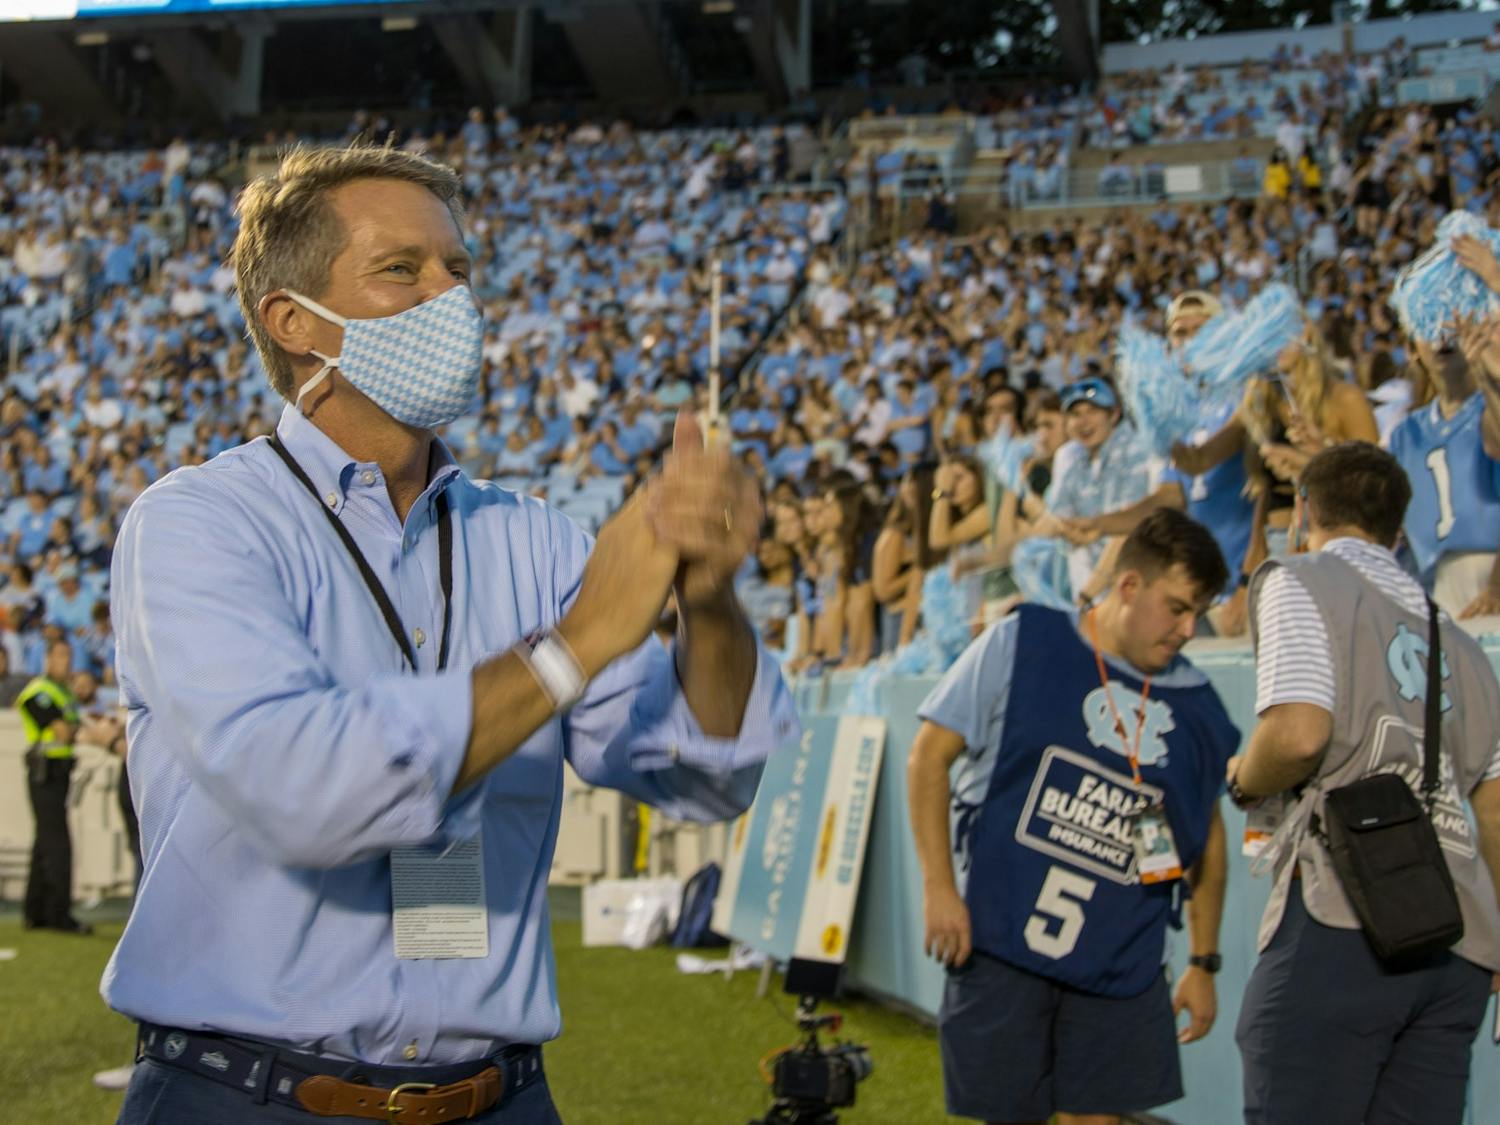 UNC Chancellor Kevin Guskiewicz greets students before the Tar Heels' home football matchup in Kenan Memorial Stadium on Sept. 18, 2021, against the University of Virginia Cavaliers. The Tar Heels won 59-39.